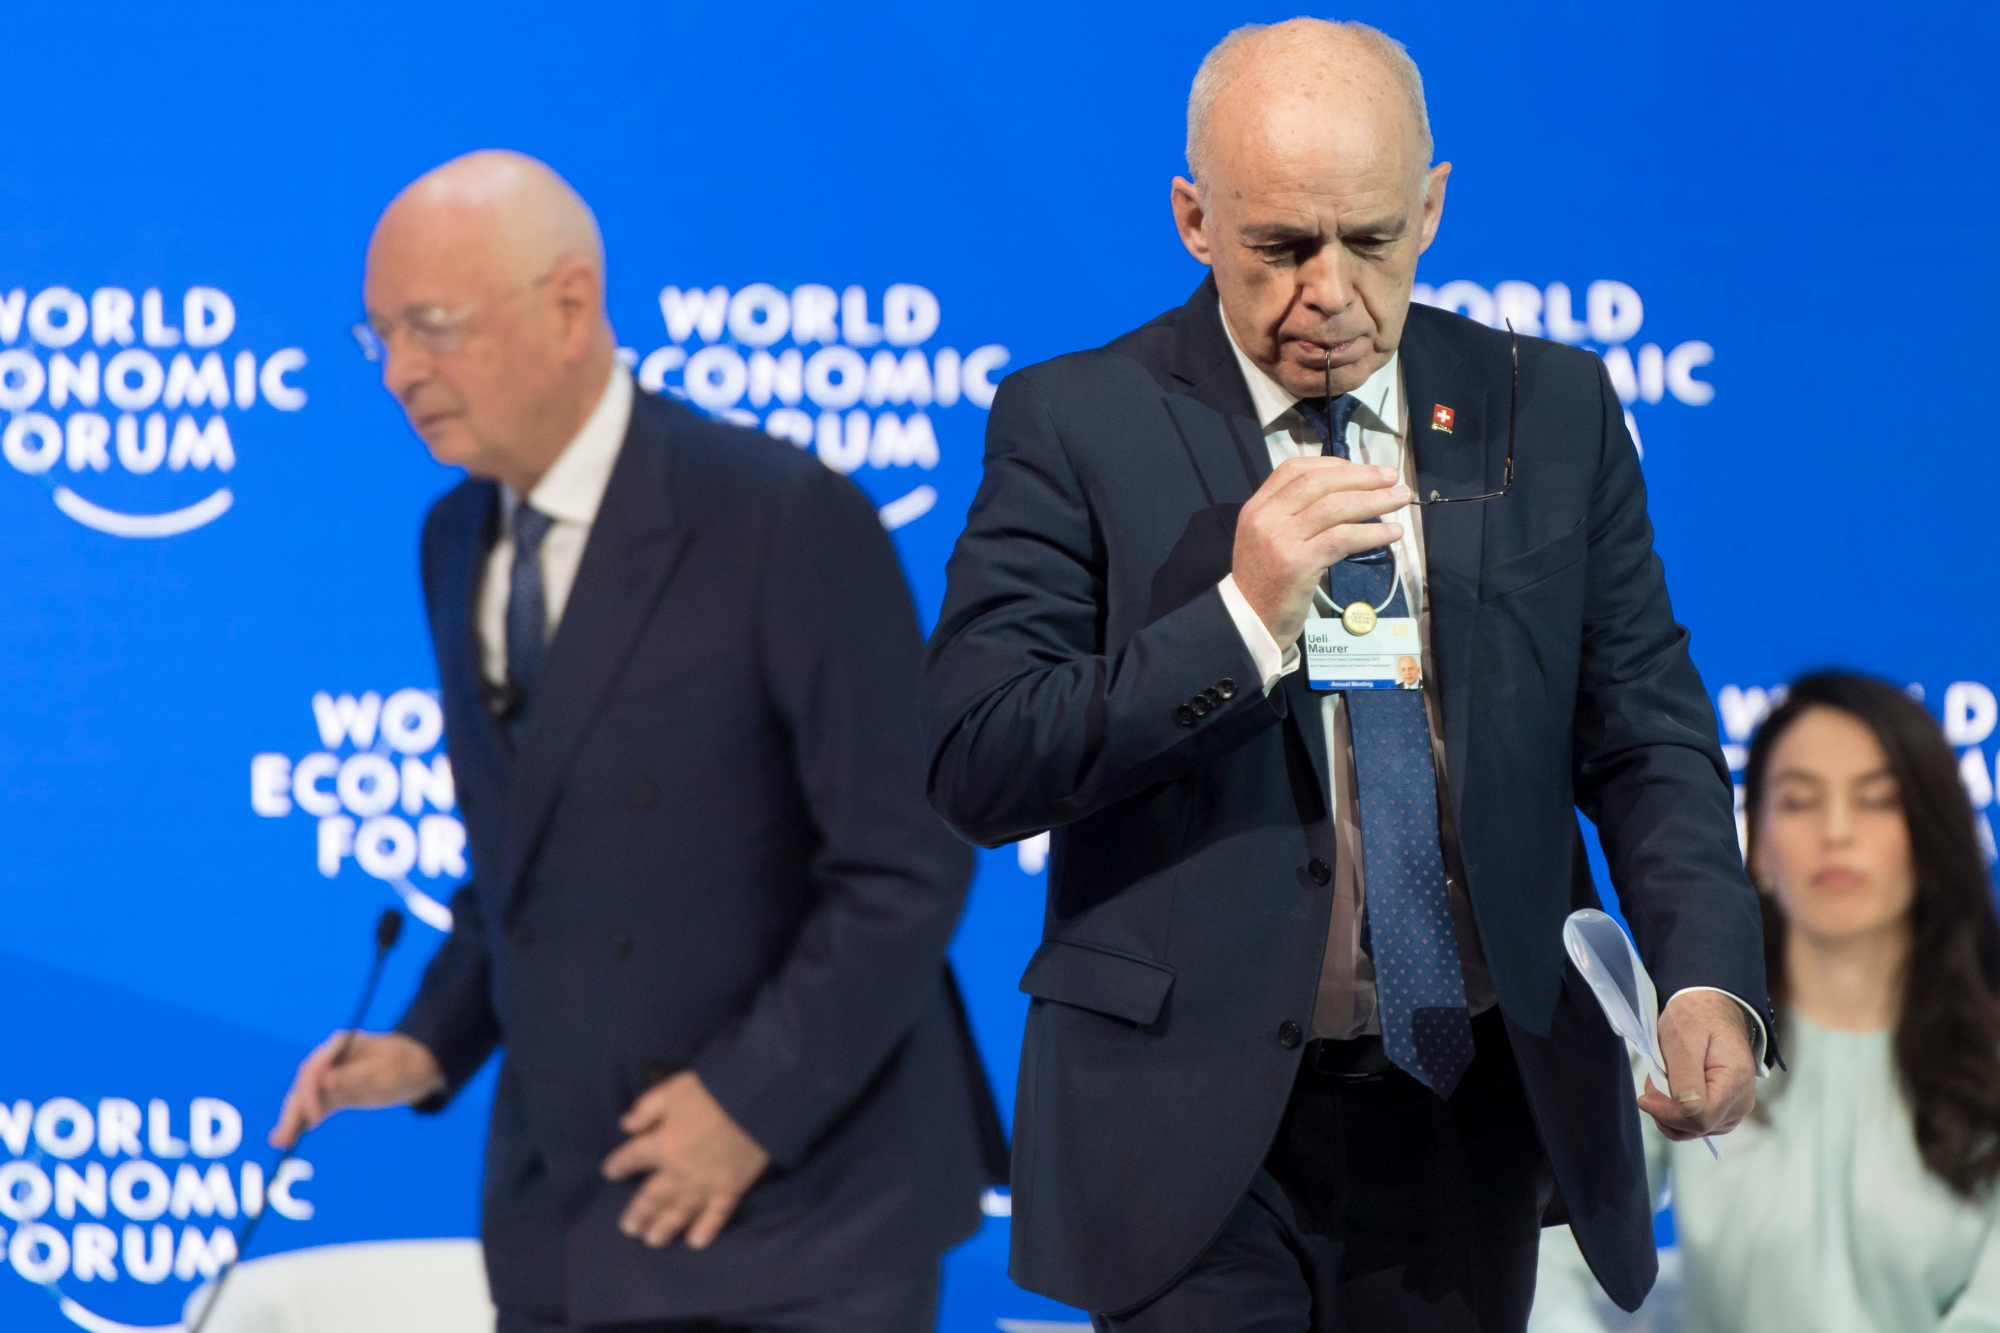 Swiss Federal President Ueli Maurer, right, leaves the stage next to German Klaus Schwab,, left, Founder and Executive Chairman of the World Economic Forum, WEF, after speaking during a plenary session in the Congress Hall the first day of the 49th Annual Meeting of the World Economic Forum, WEF, in Davos, Switzerland, Tuesday, January 22, 2019. The meeting brings together entrepreneurs, scientists, corporate and political leaders in Davos under the topic "Globalization 4.0" from 22 - 25 January 2019. (KEYSTONE/Laurent Gillieron) SWITZERLAND WORLD ECONOMIC FORUM WEF 2019